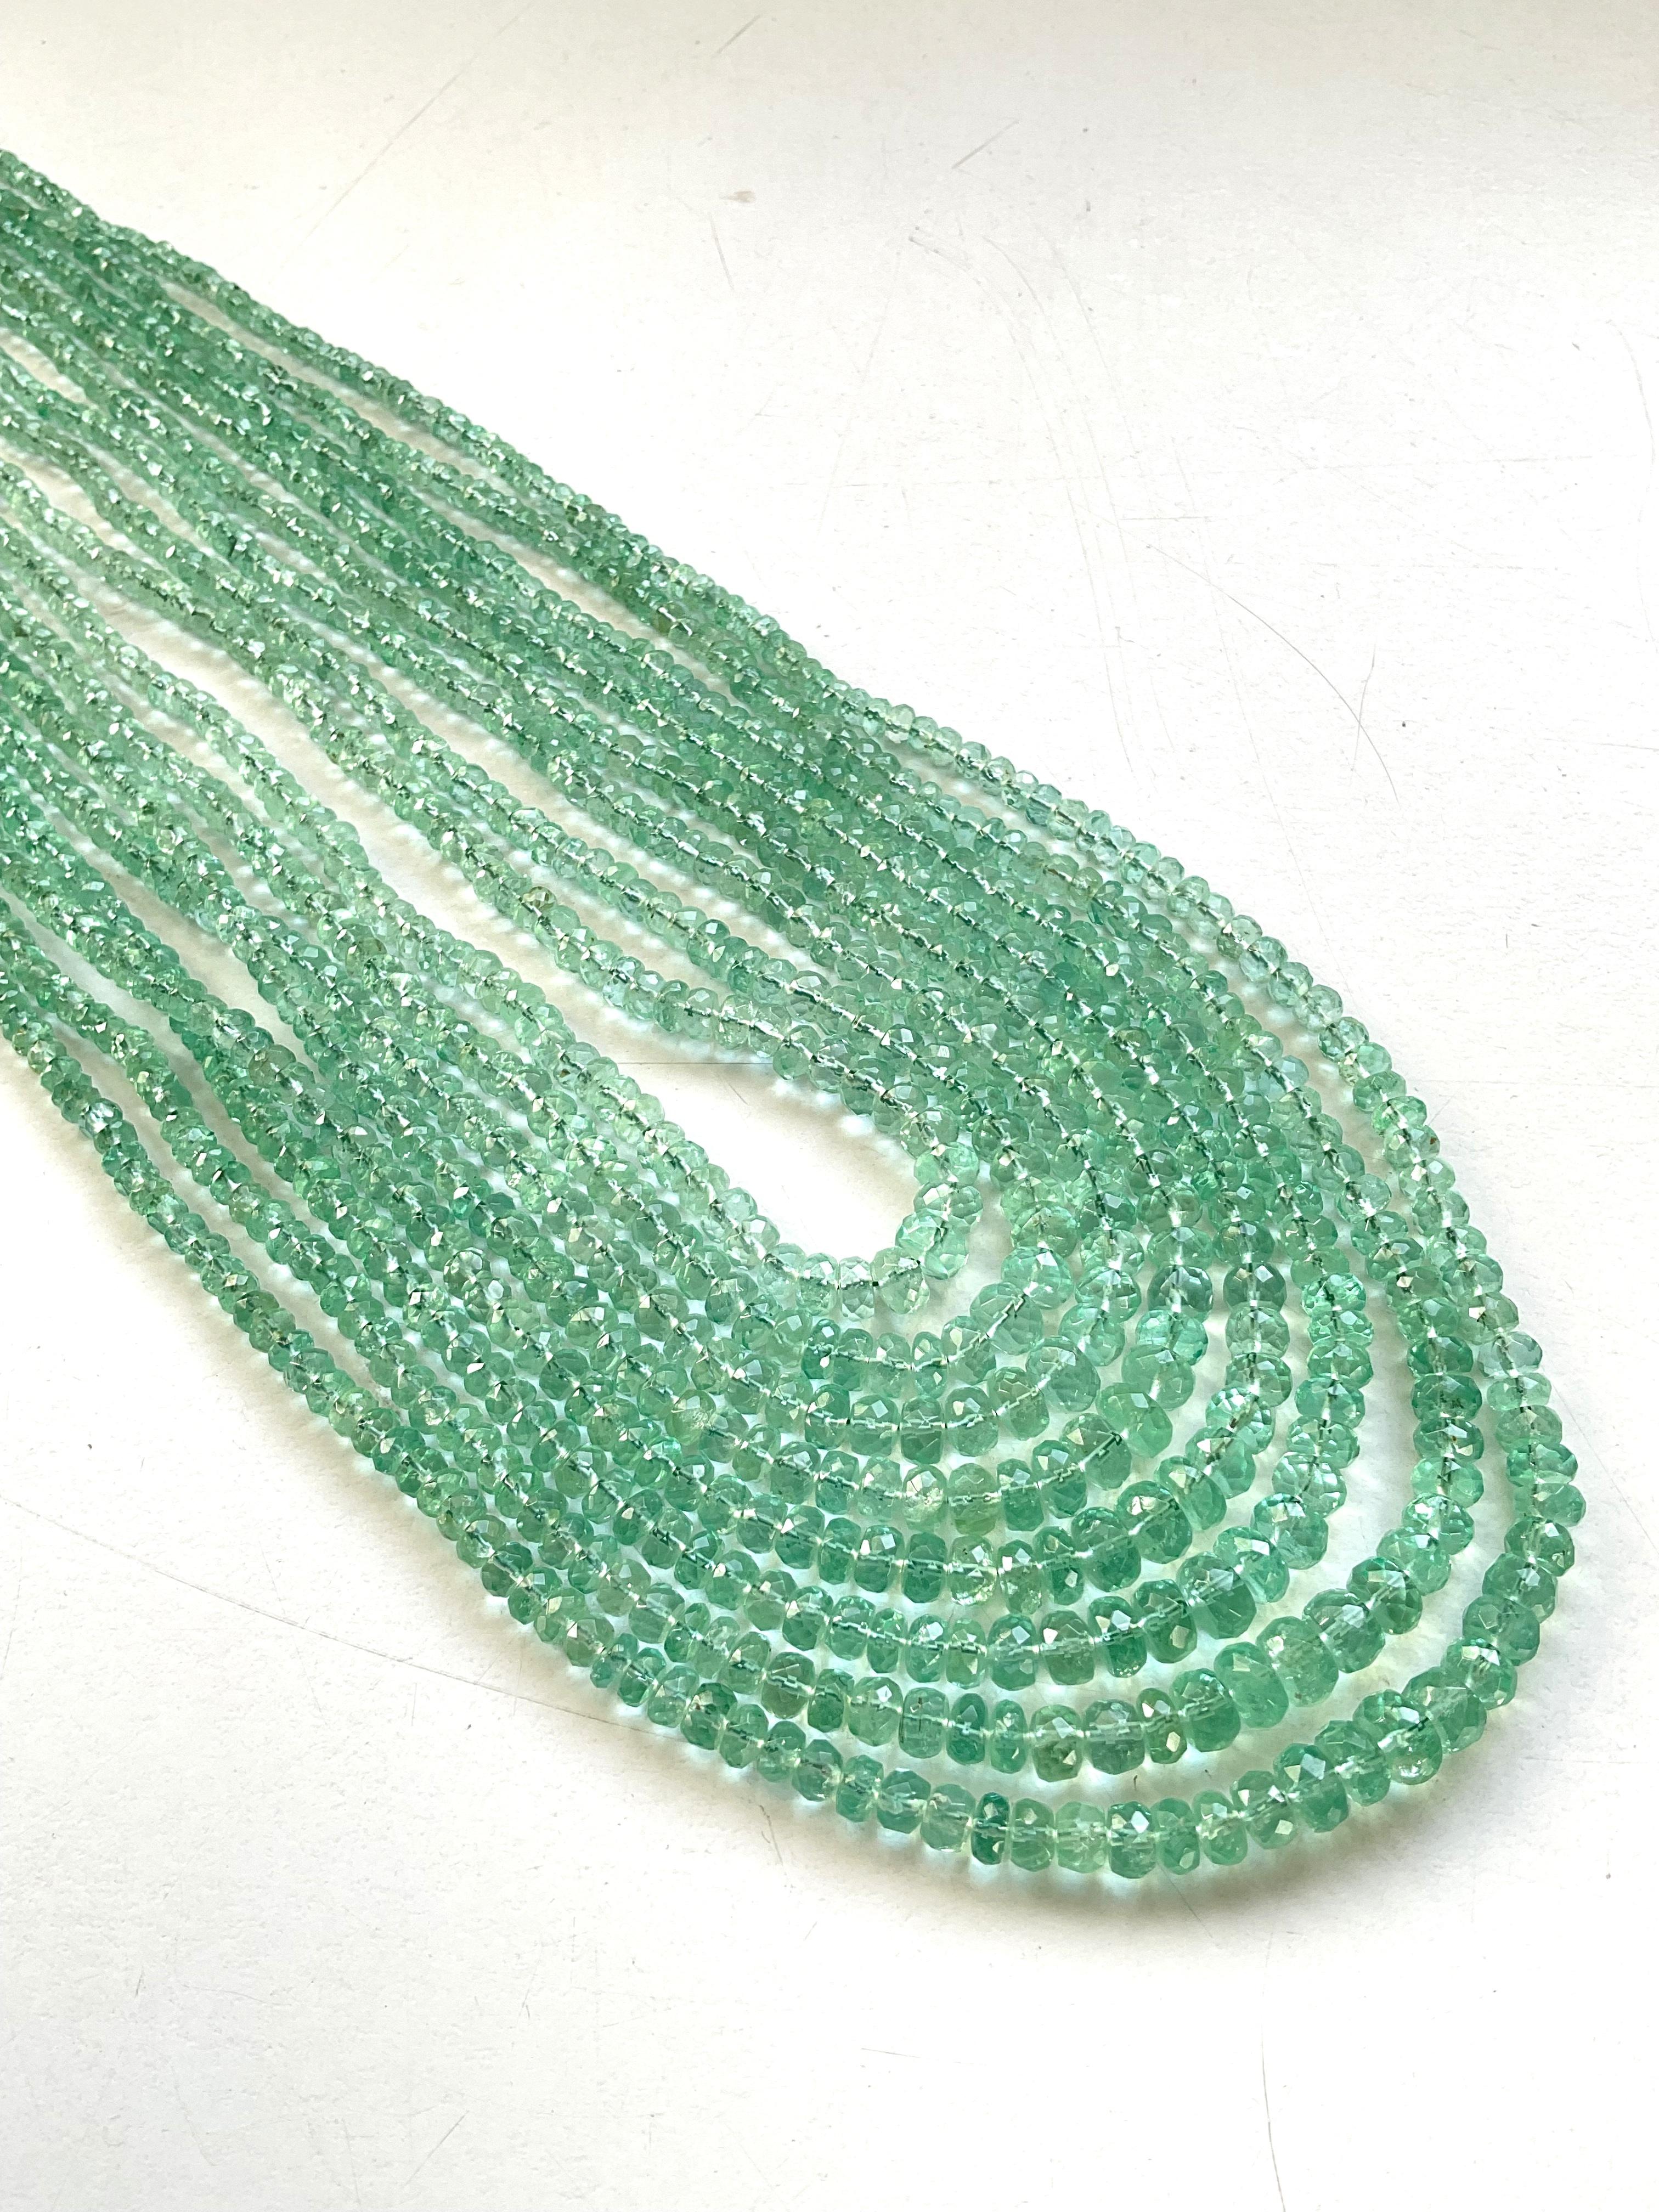 342.09 Carats Panjshir Emerald Faceted Beads For Fine Jewelry Natural Gemstone In New Condition For Sale In Jaipur, RJ